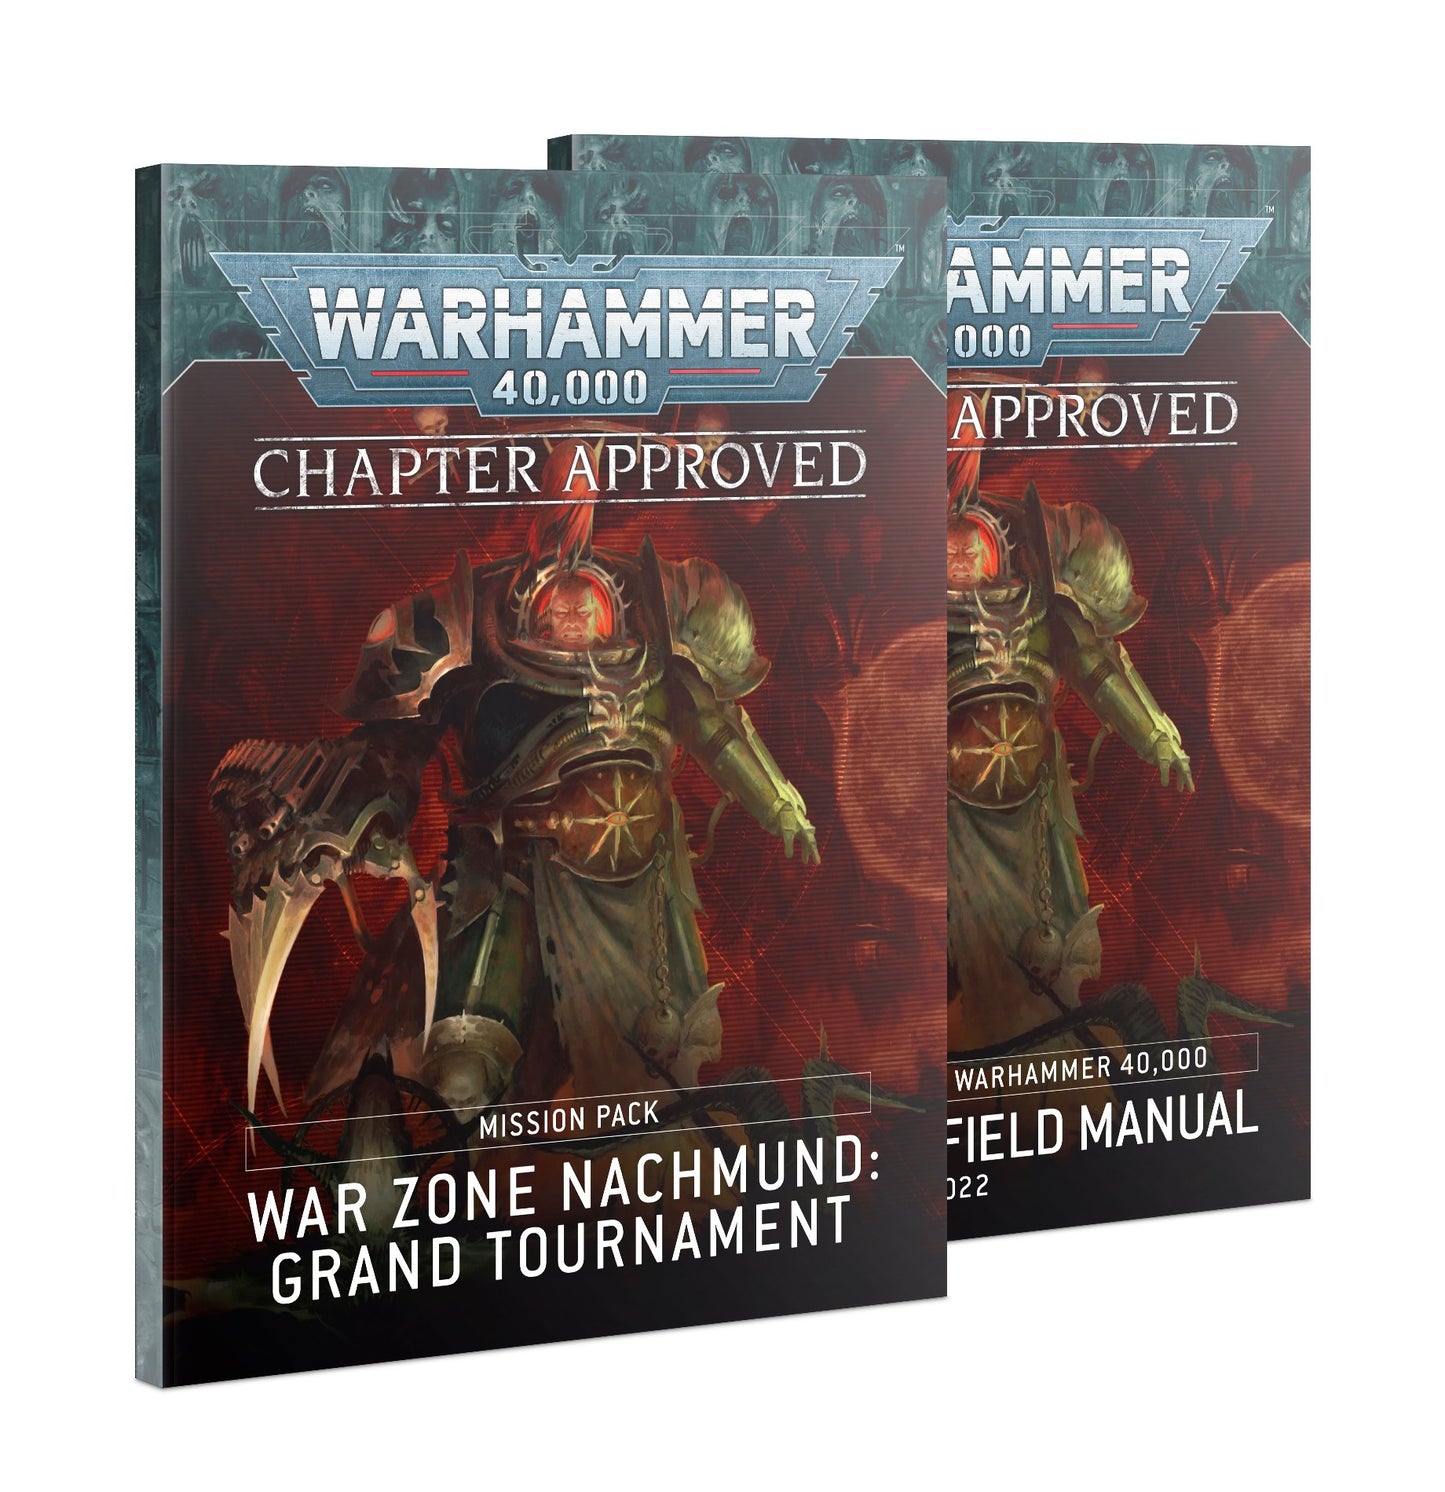 Warhammer 40000: Chapter Approved: War Zone Nachmund Grand Tournament Mission Pack and Munitorum Field Manual 2022